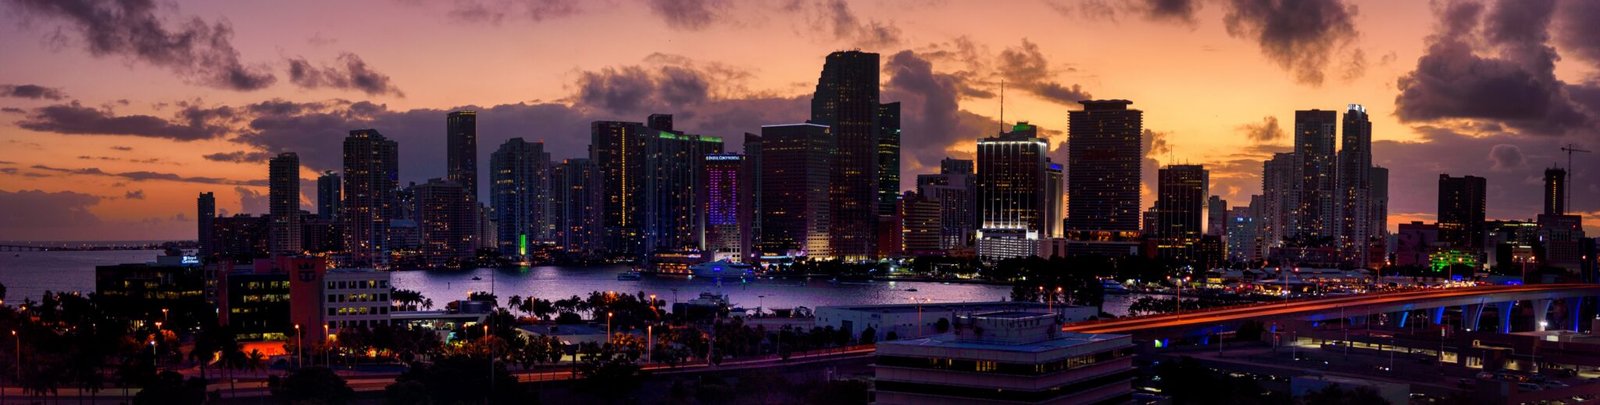 The Miami, Florida skyline at sunset on New Years day, 2019.